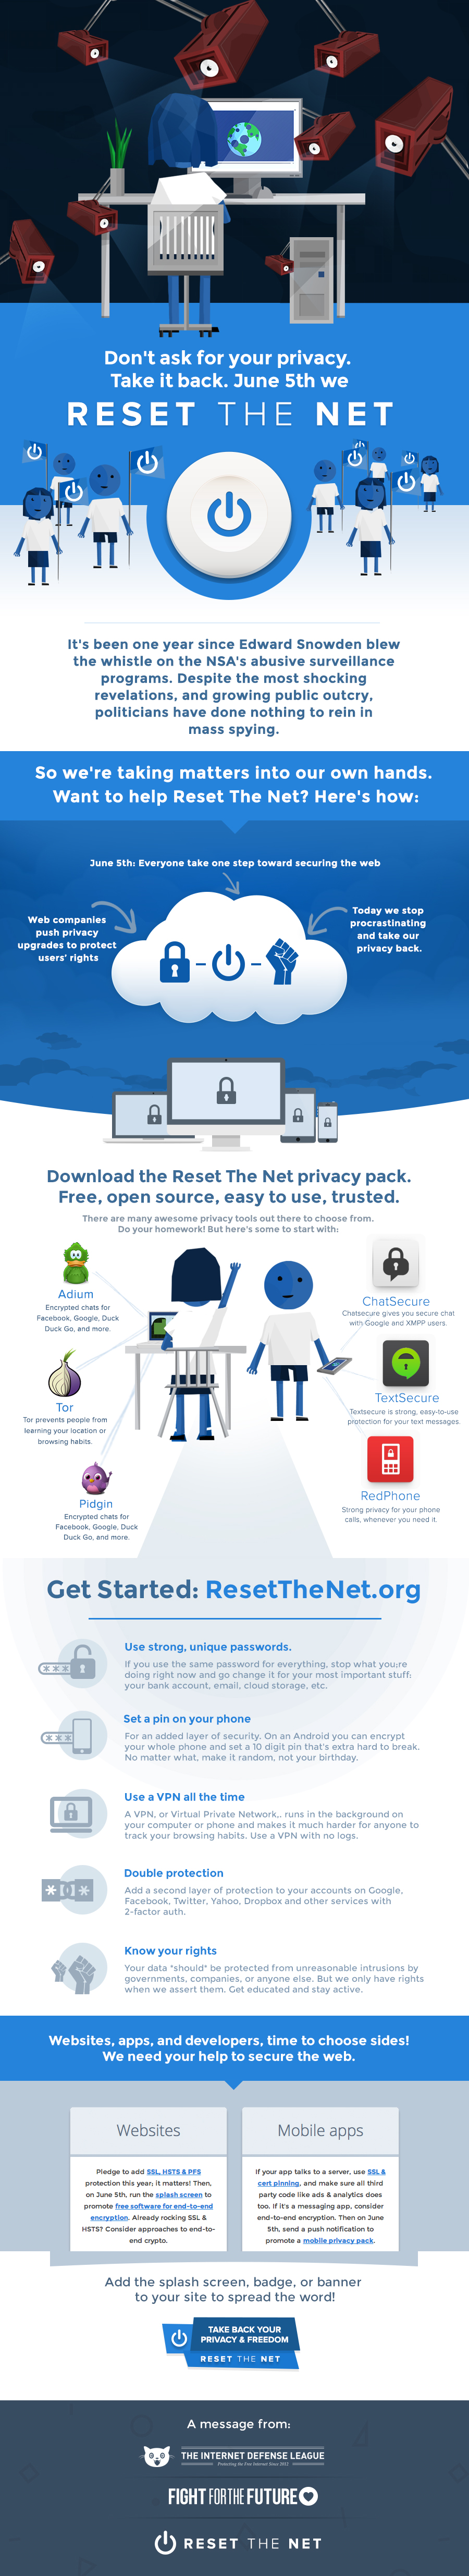 Infographic: Take back privacy - Reset the Net!